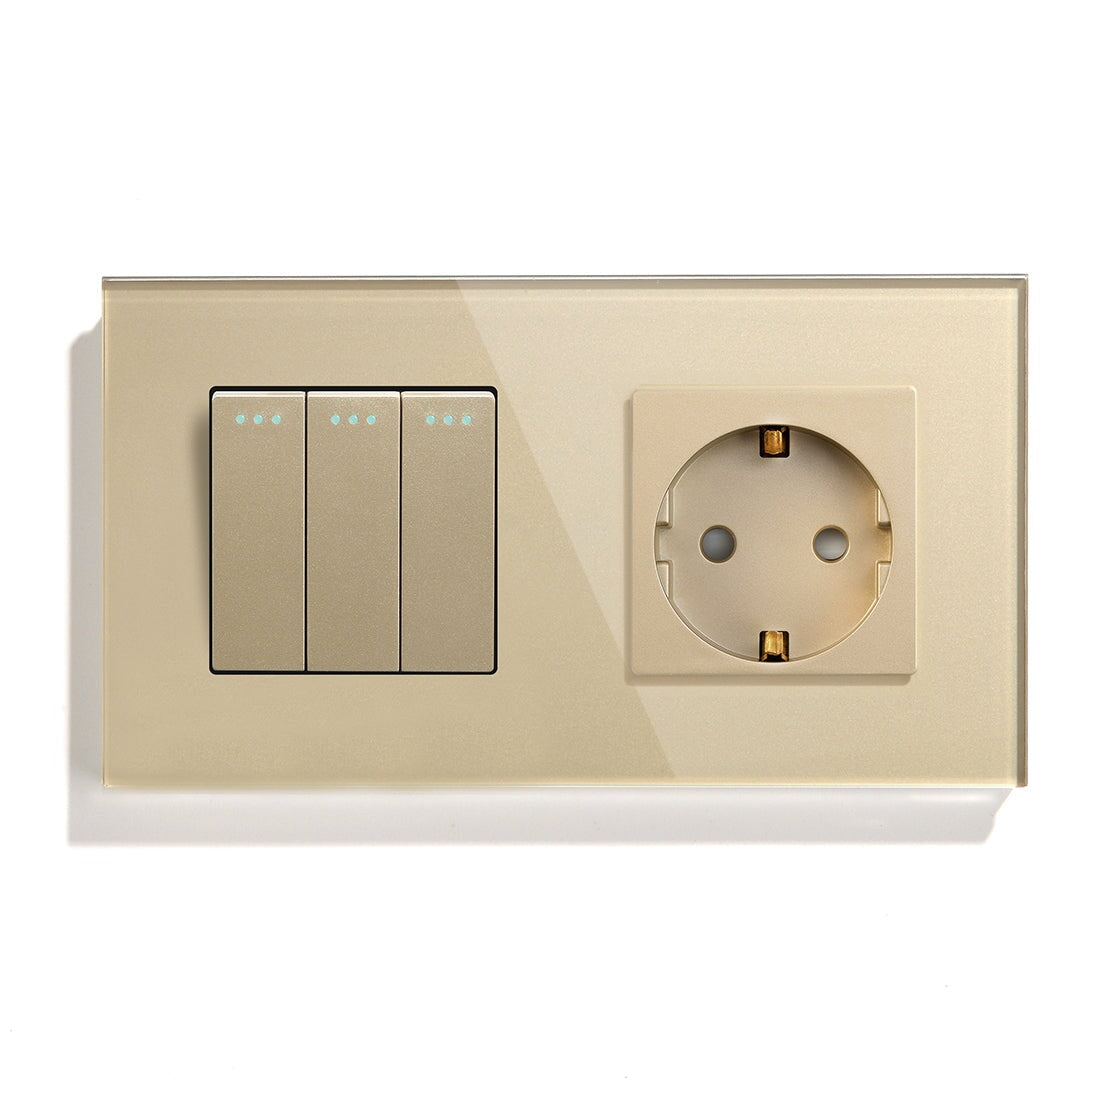 BSEED Mechanical 1/2/3 Gang 1/2Way Touch Light Switch With Normal Eu Socket Power Outlets & Sockets Bseedswitch Golden 3Gang 1Way